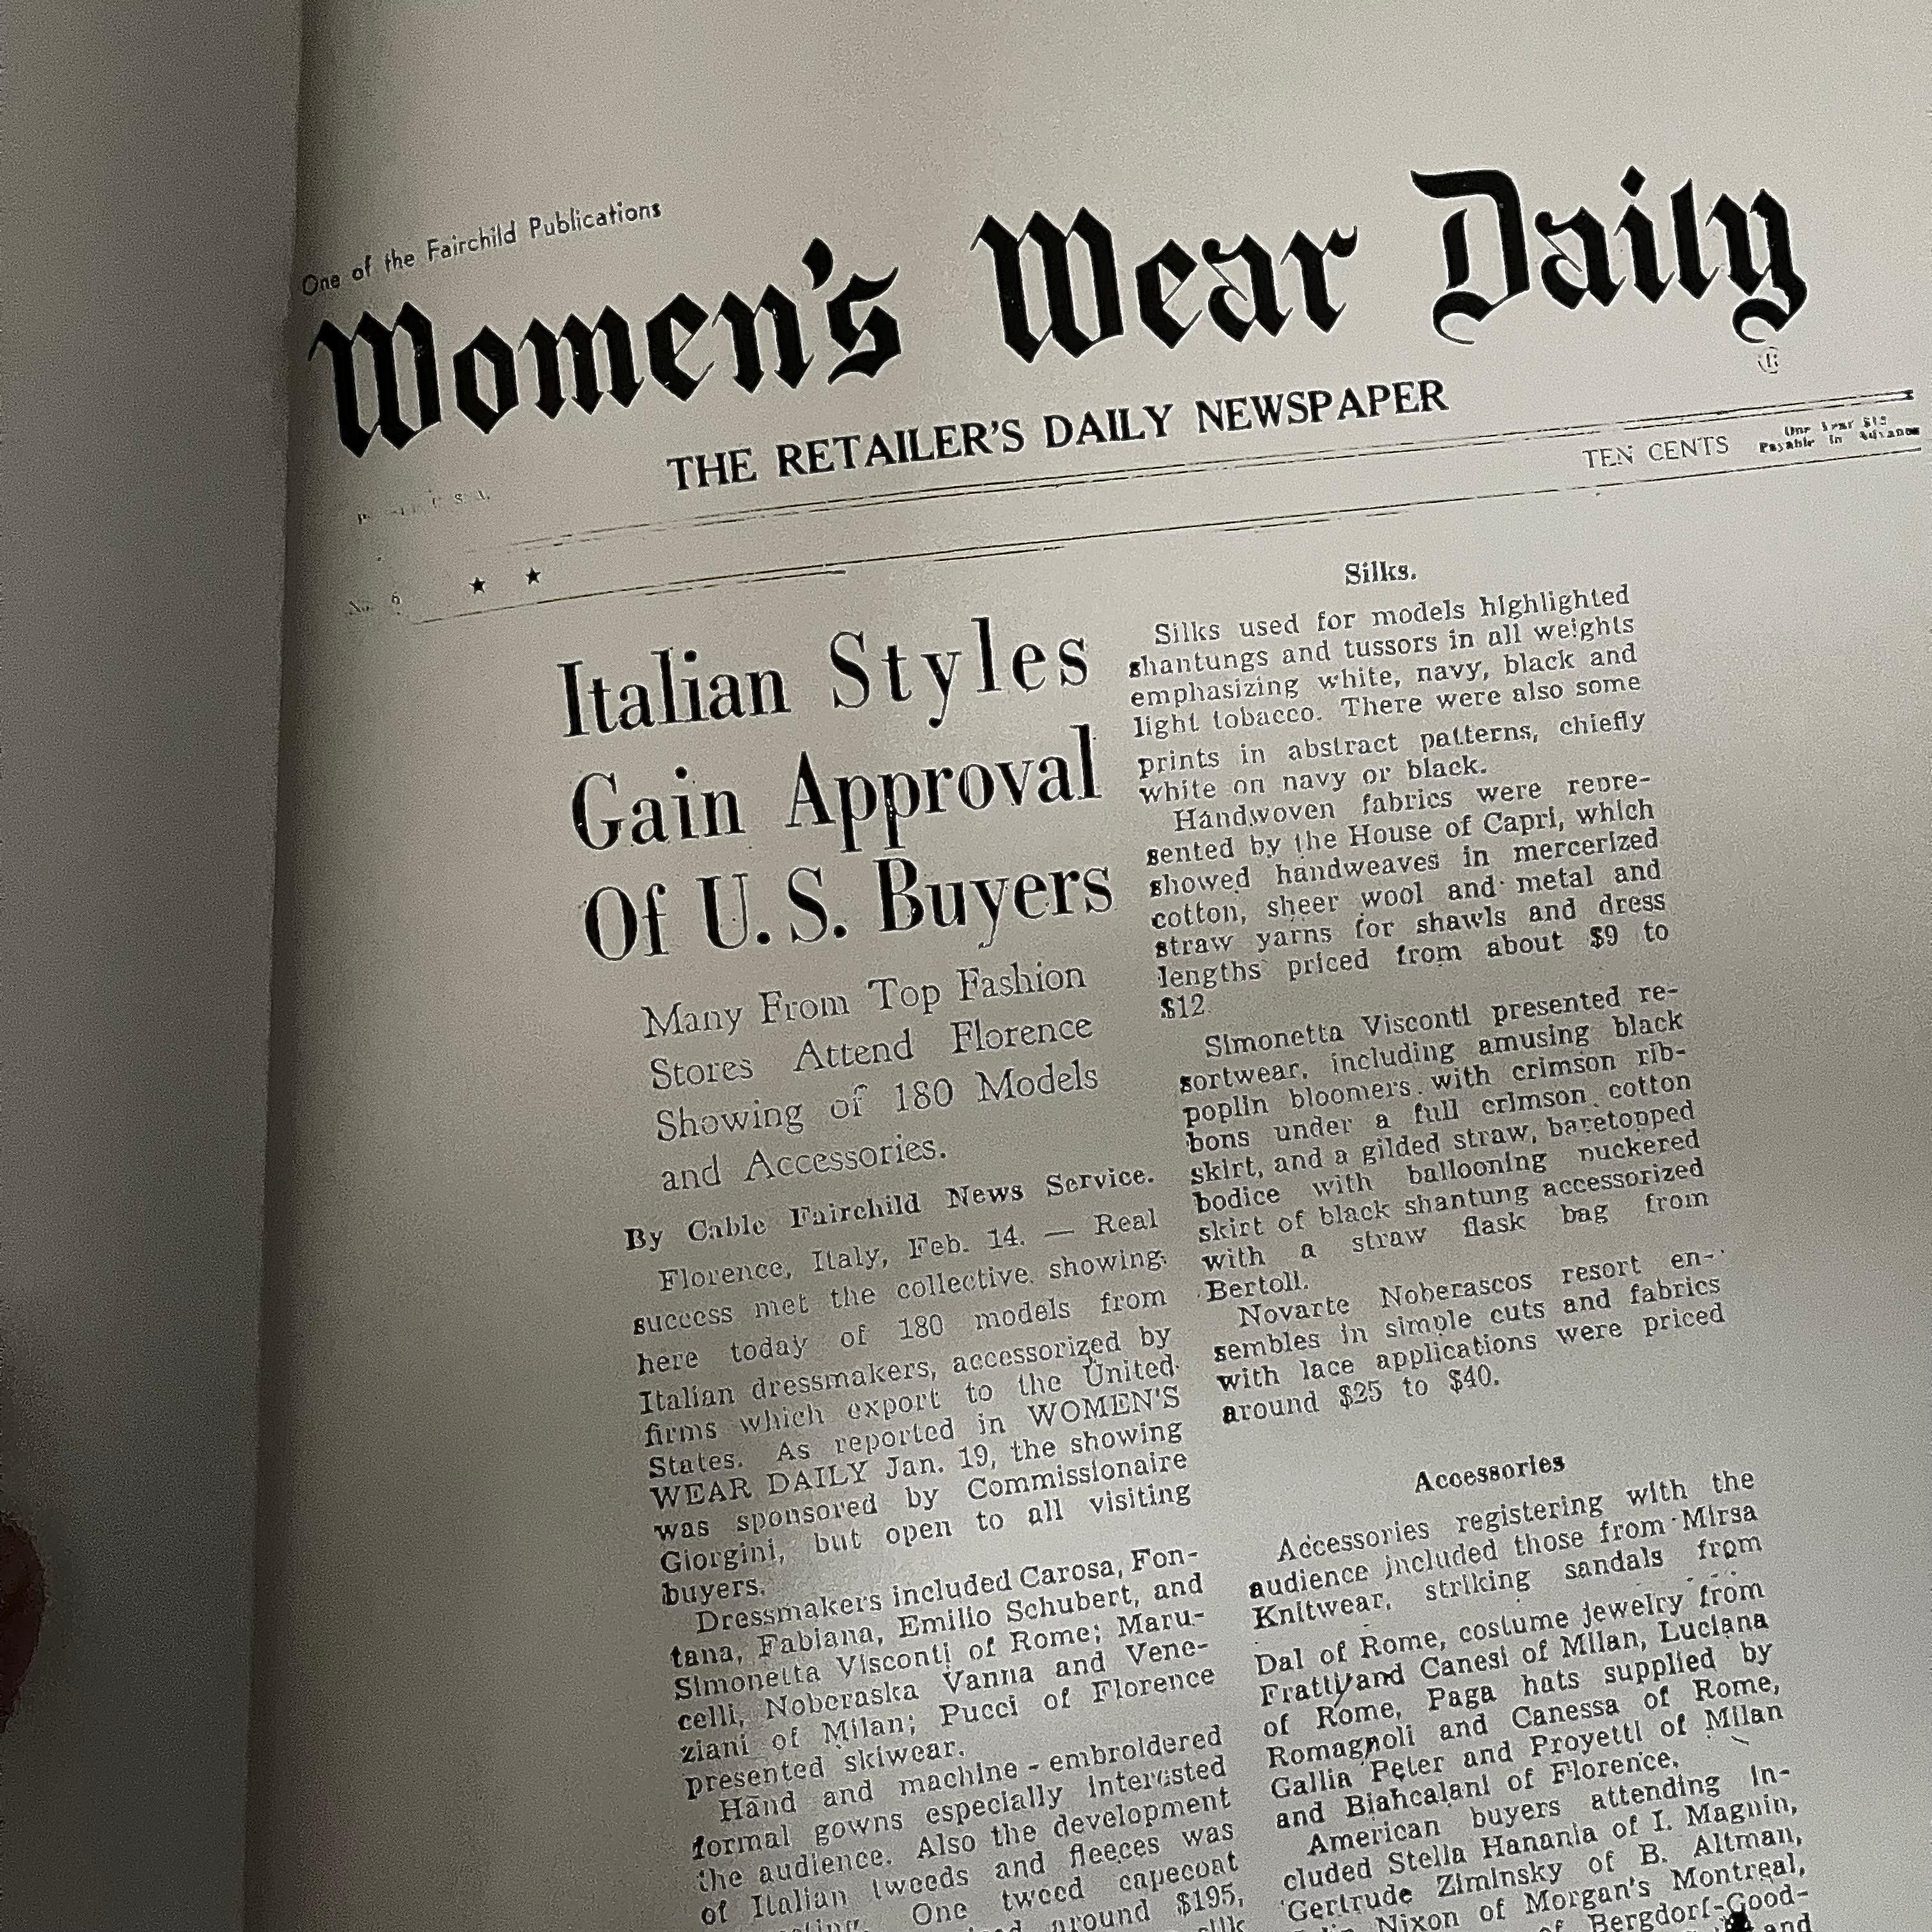 Published by Electa 1992 in conjunction with an exhibition held at the Palazzo Strozzi, Florence, June 25-Sept. 25, softback in slipcase.

On the 22nd July 1952, Giovanni Battista Giorgini, a Florentine fashion buyer, organised the fourth ‘Italian